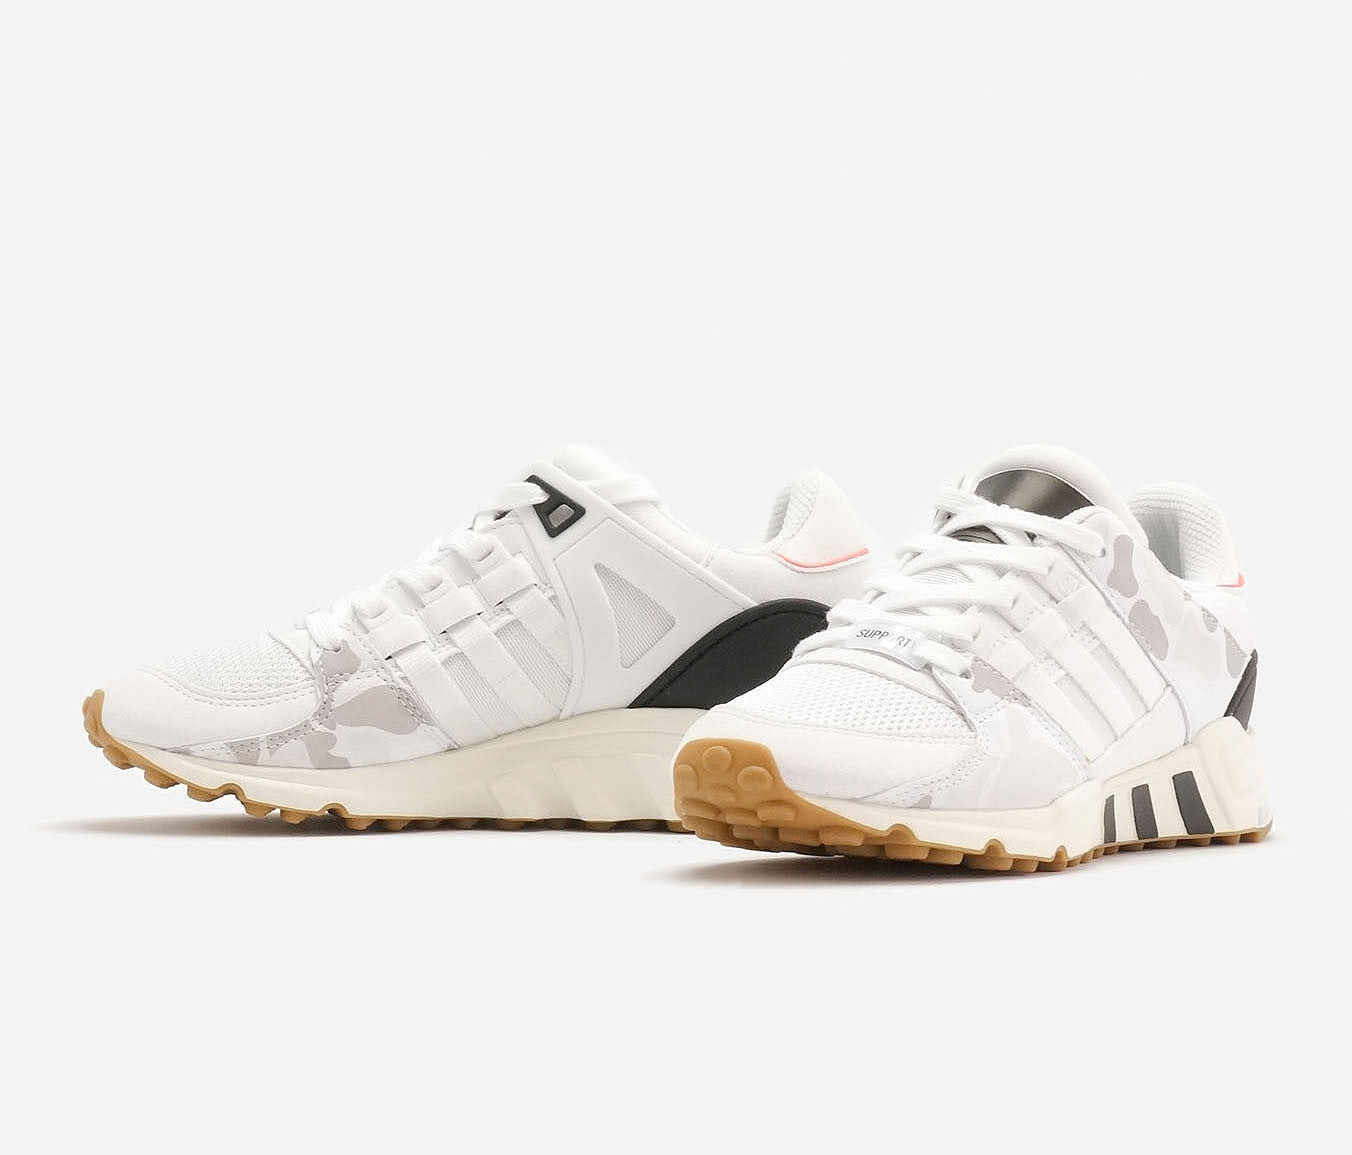 STYLE | Adidas EQT Support RF White/Camo/Black Review